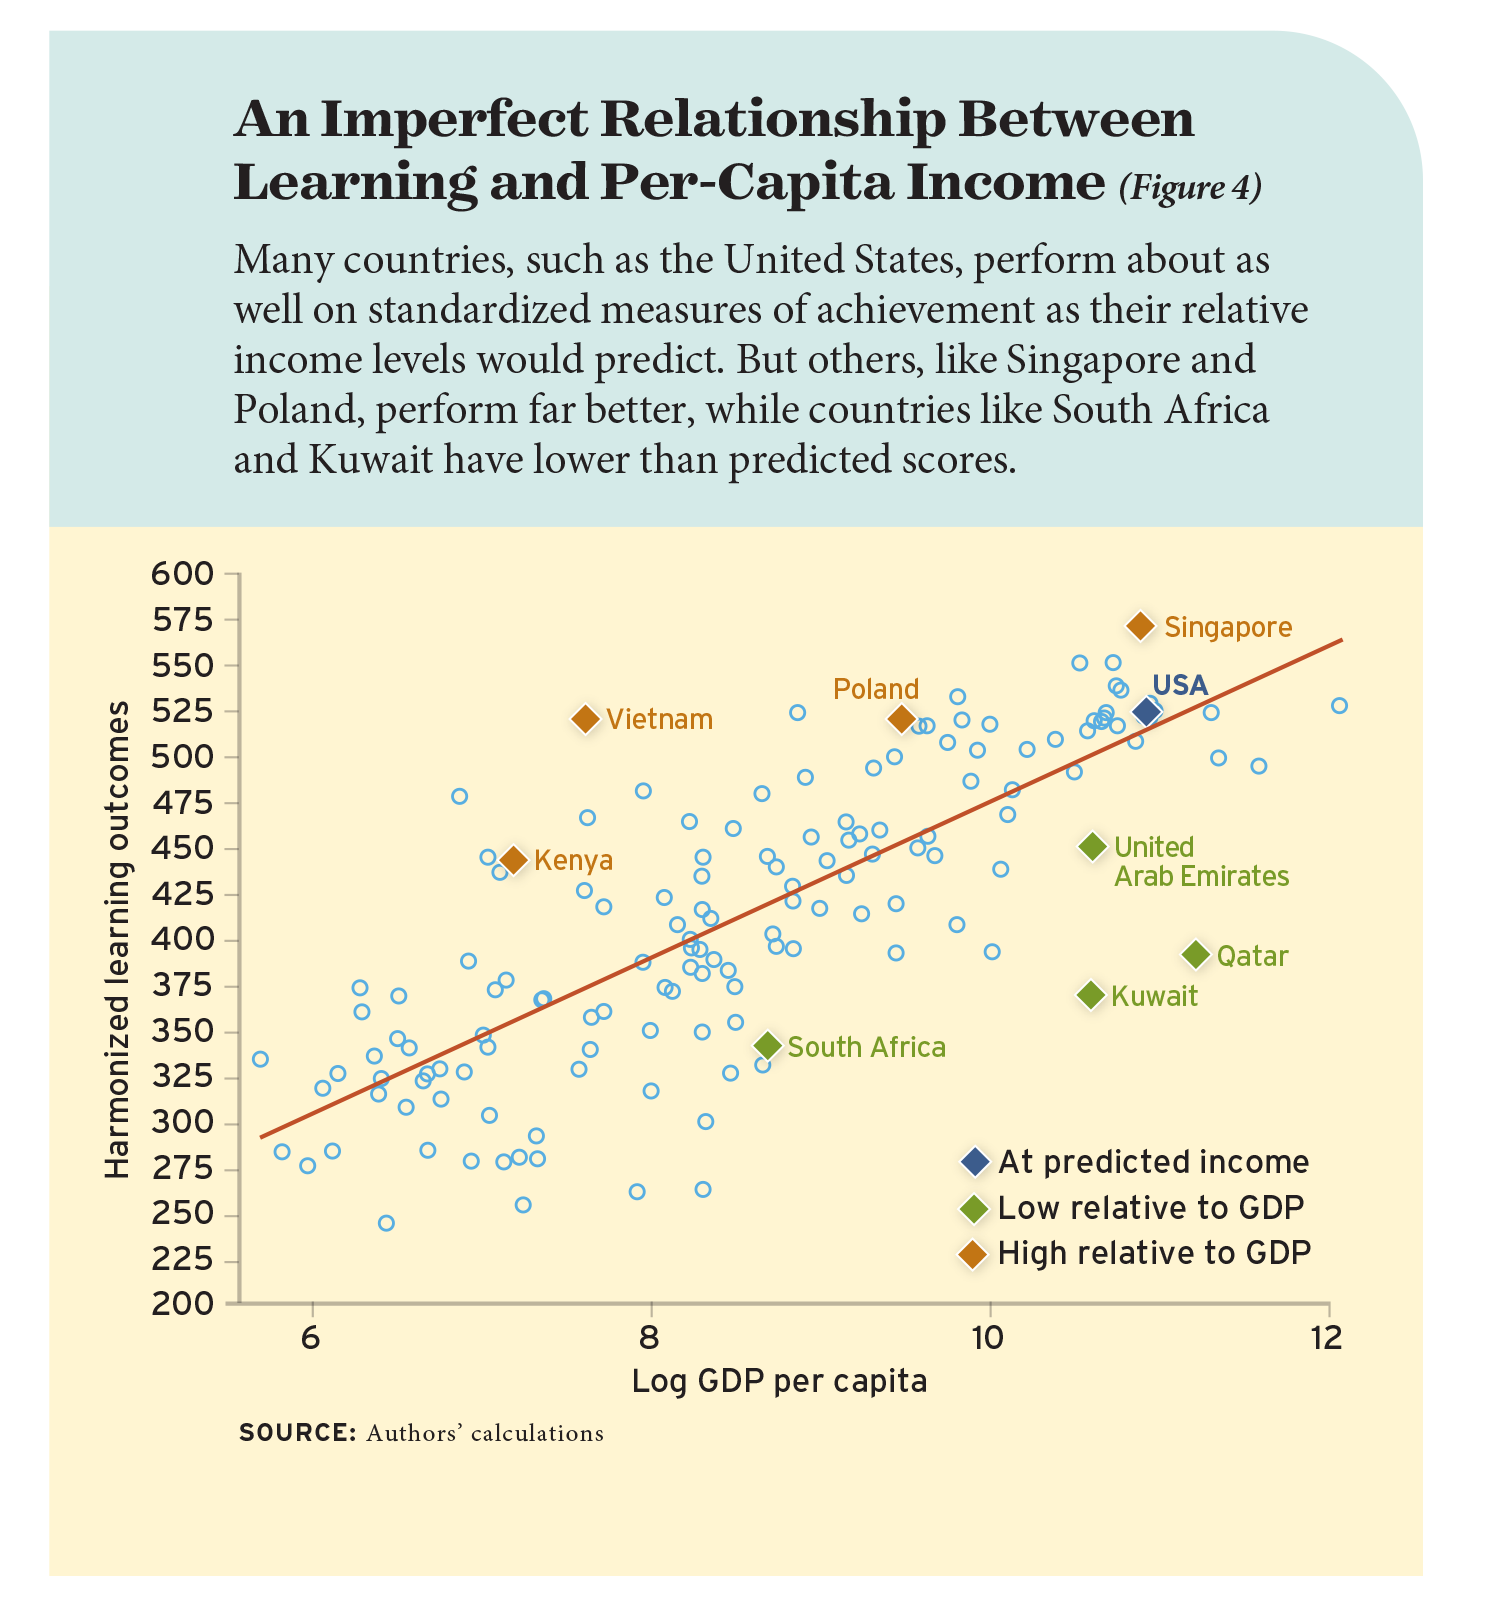 An Imperfect Relationship Between Learning and Per-Capita Income (Figure 4)